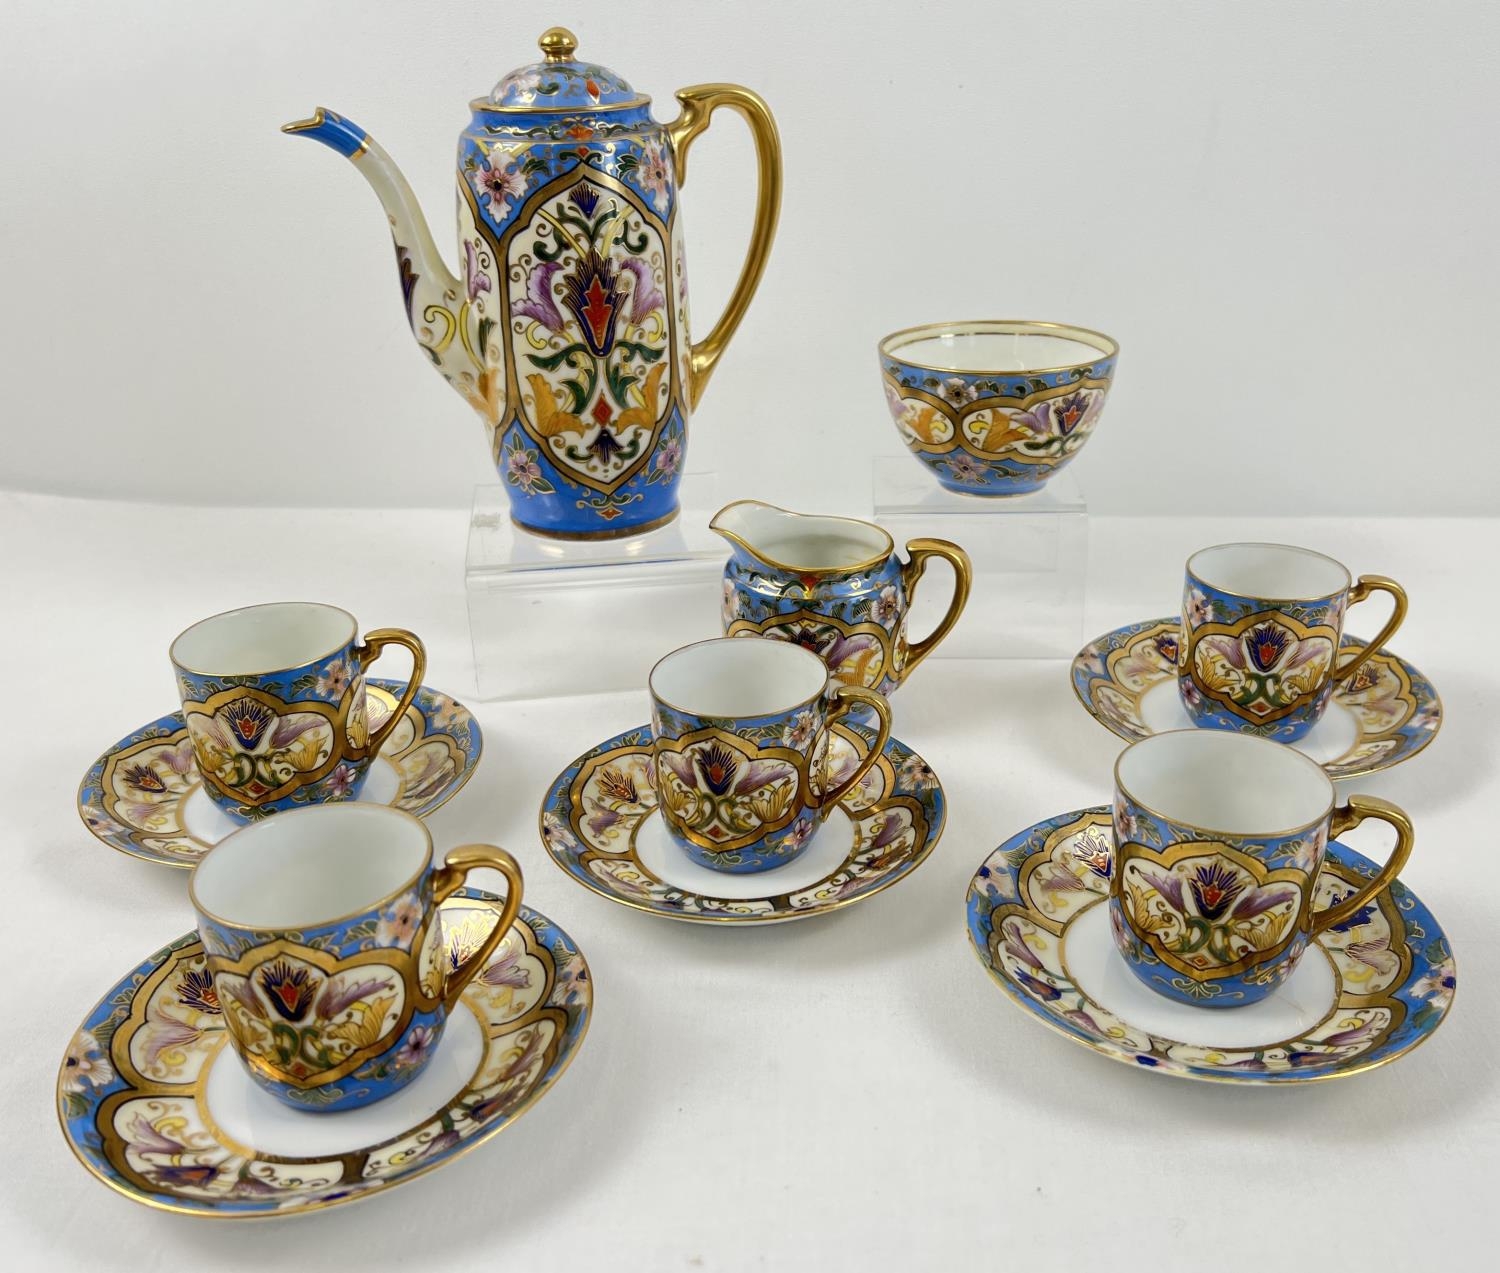 A vintage Noritake Japanese ceramic coffee set with floral & gilt decoration. Comprising: coffee